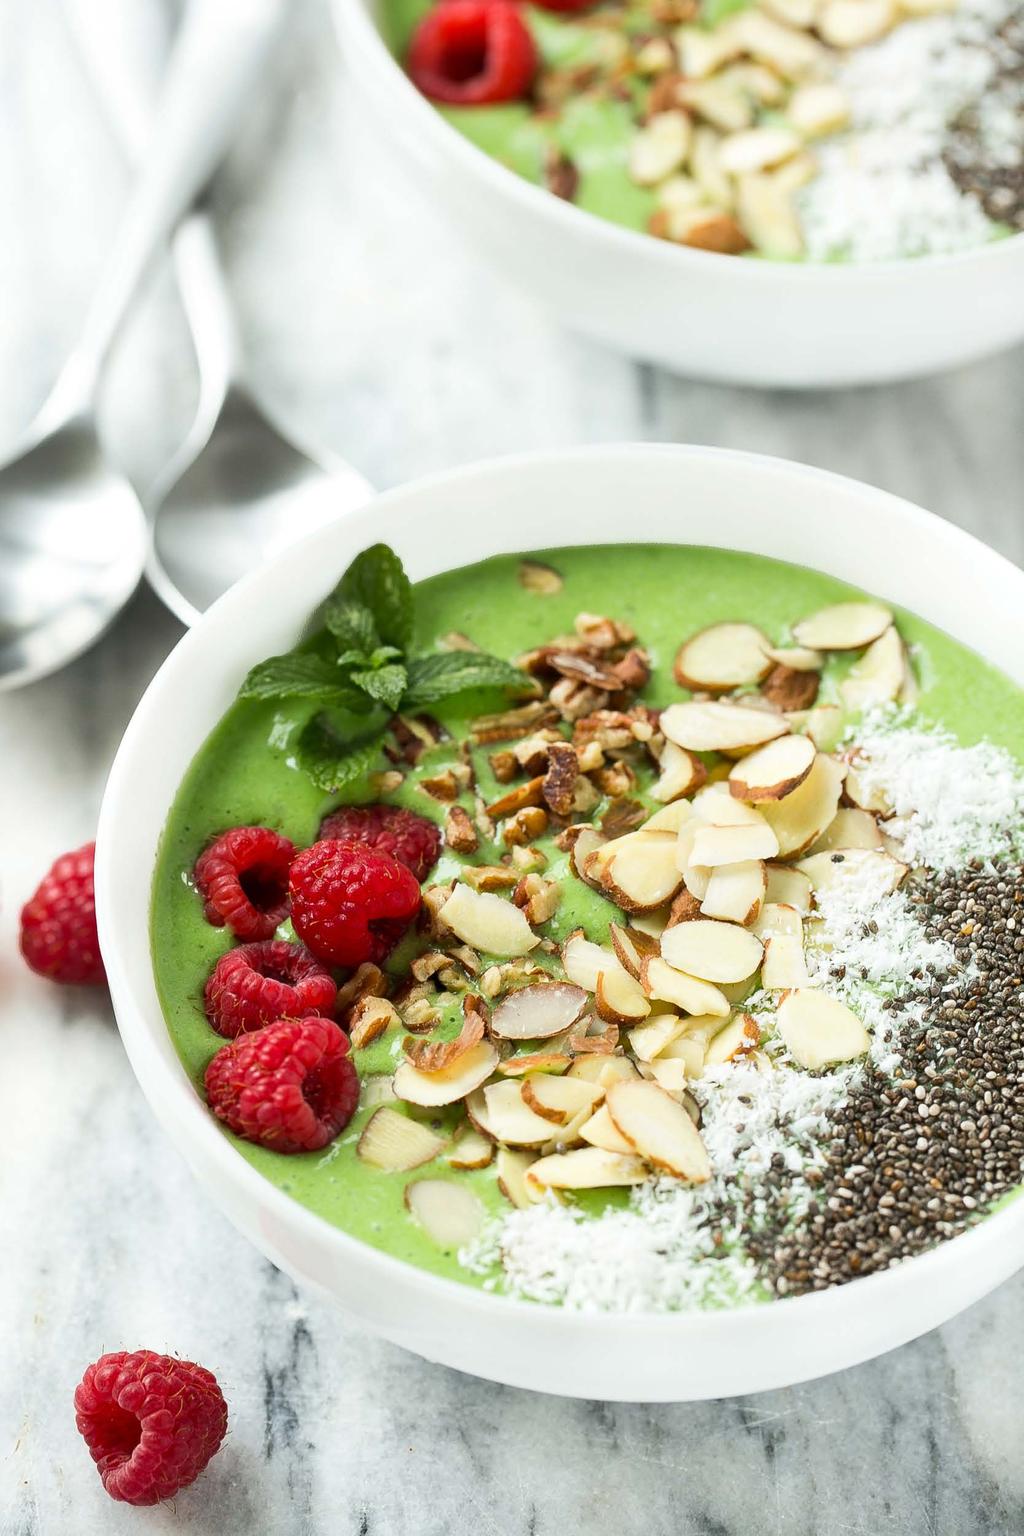 16. Green Smoothie Bowl A protein packed green smoothie topped with a variety of fruit, nuts and seeds.